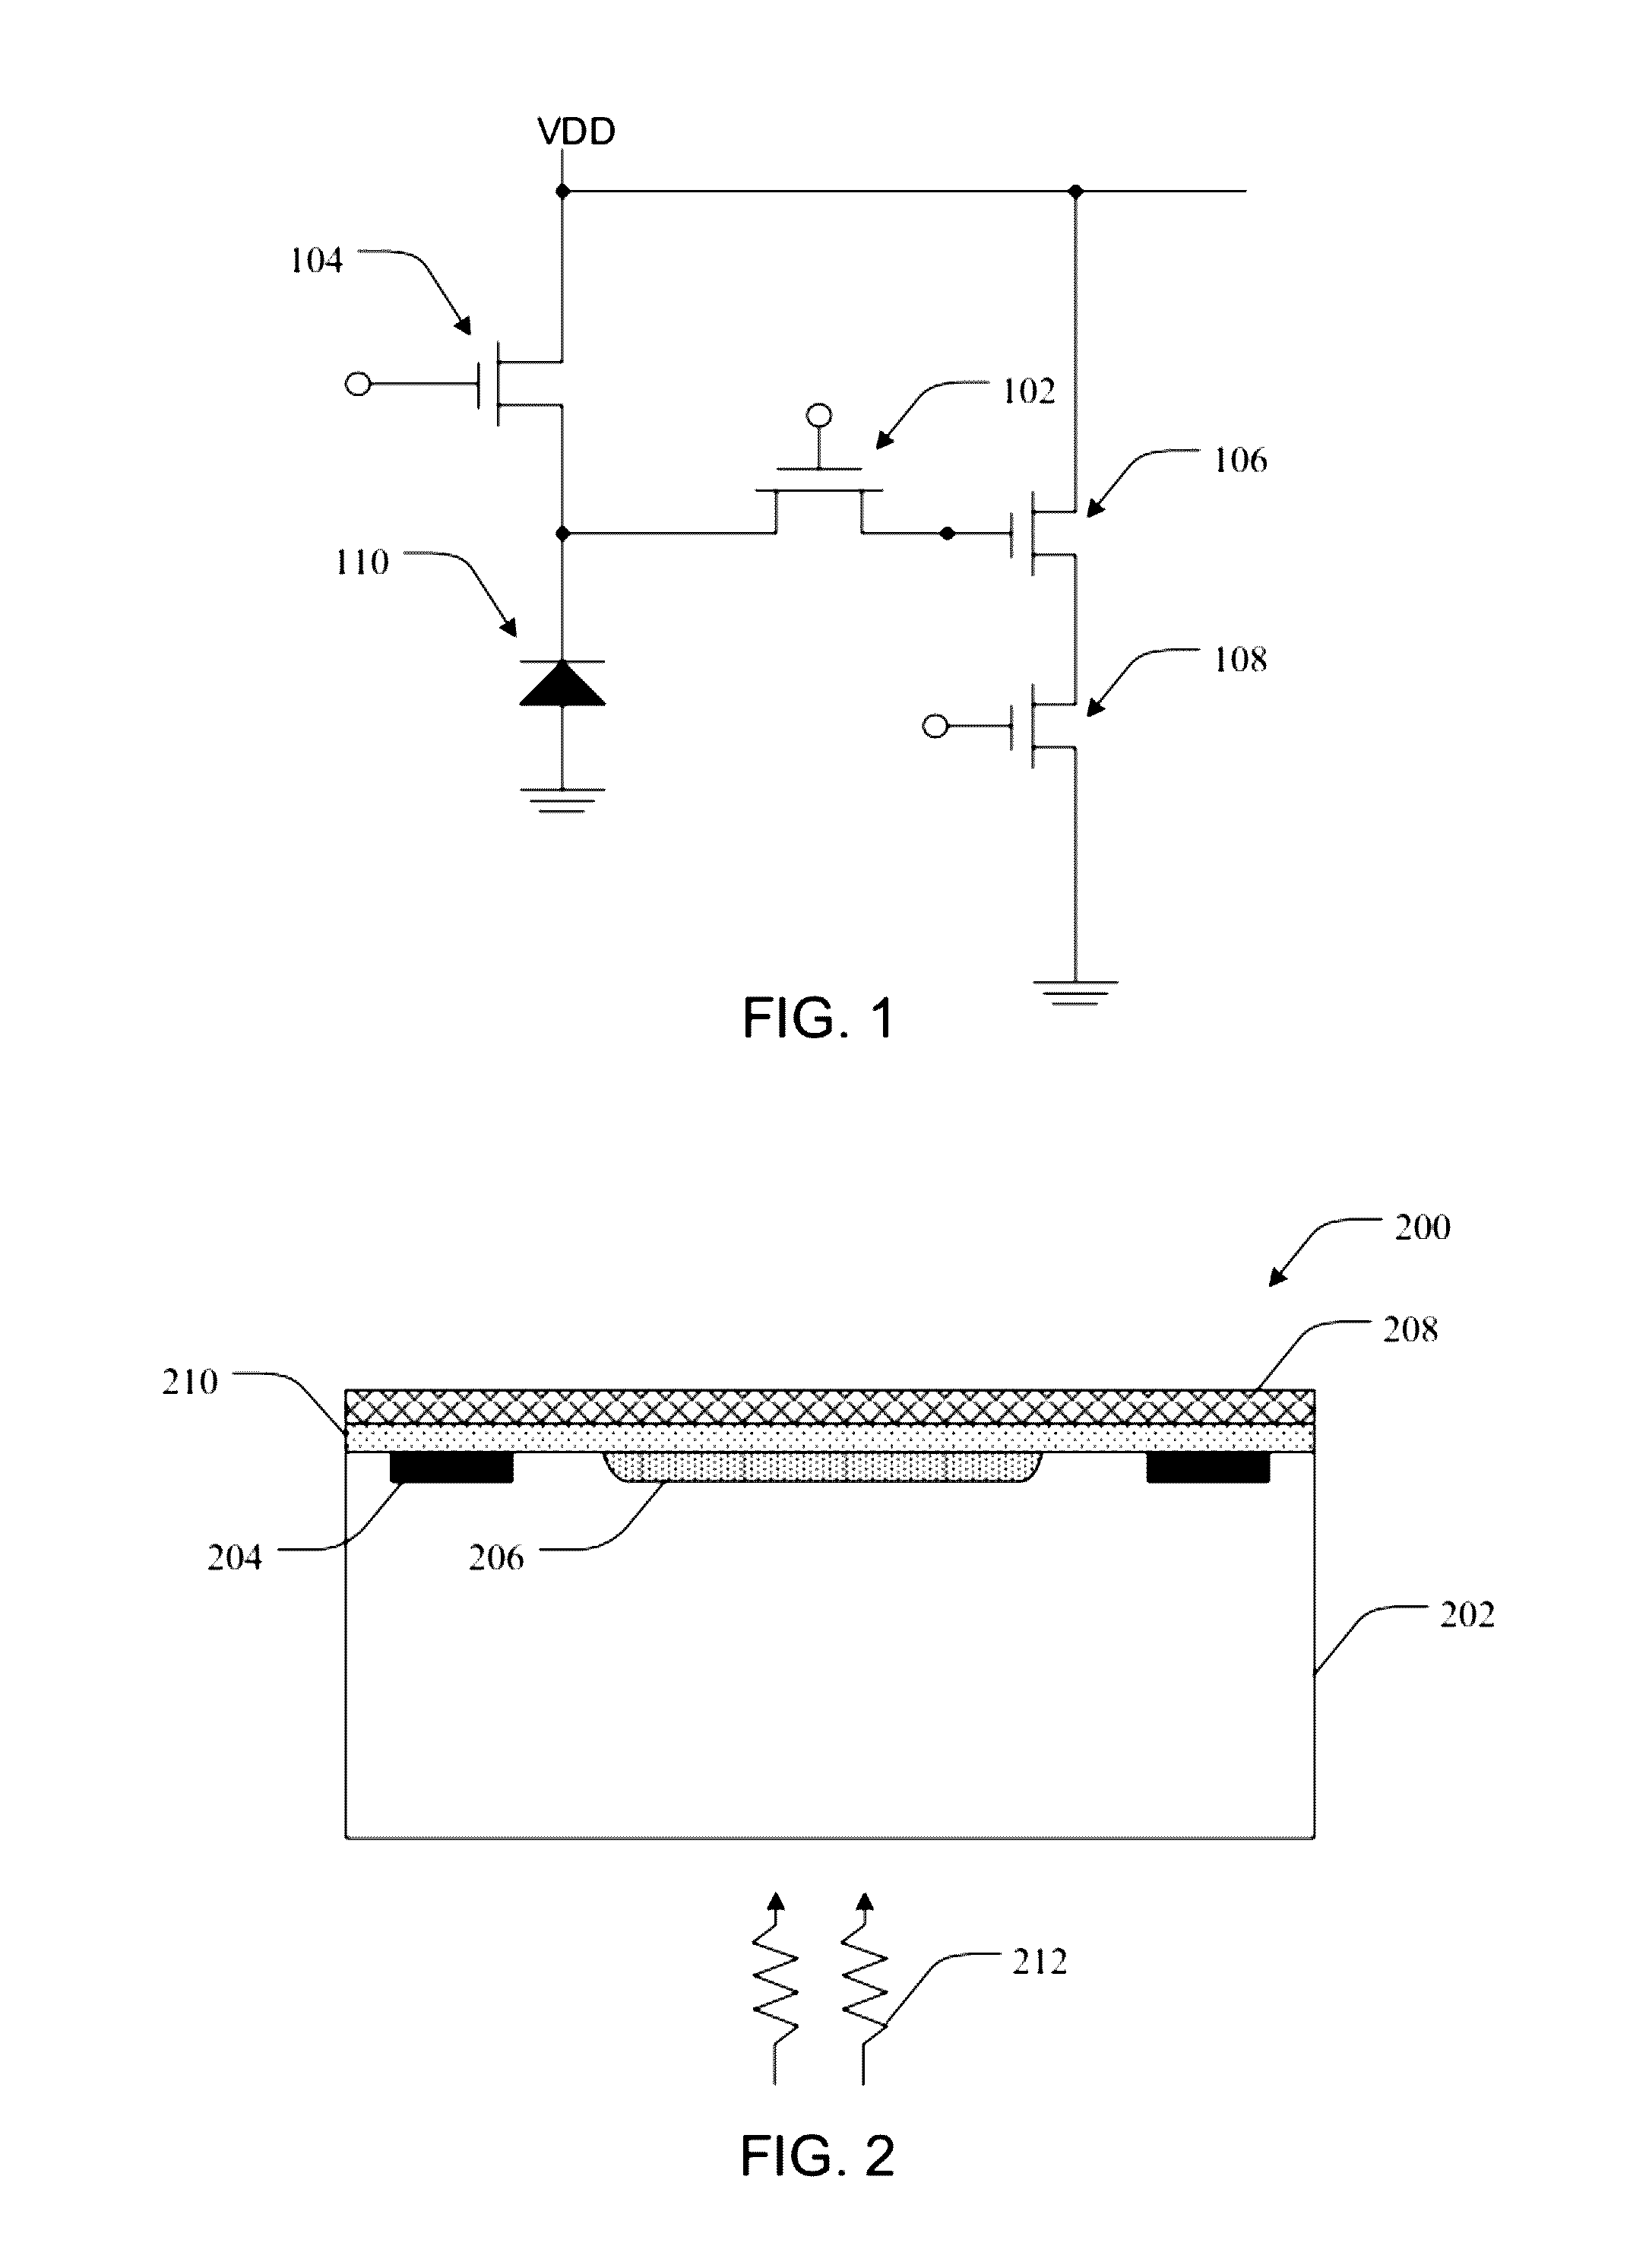 Process module for increasing the response of backside illuminated photosensitive imagers and associated methods